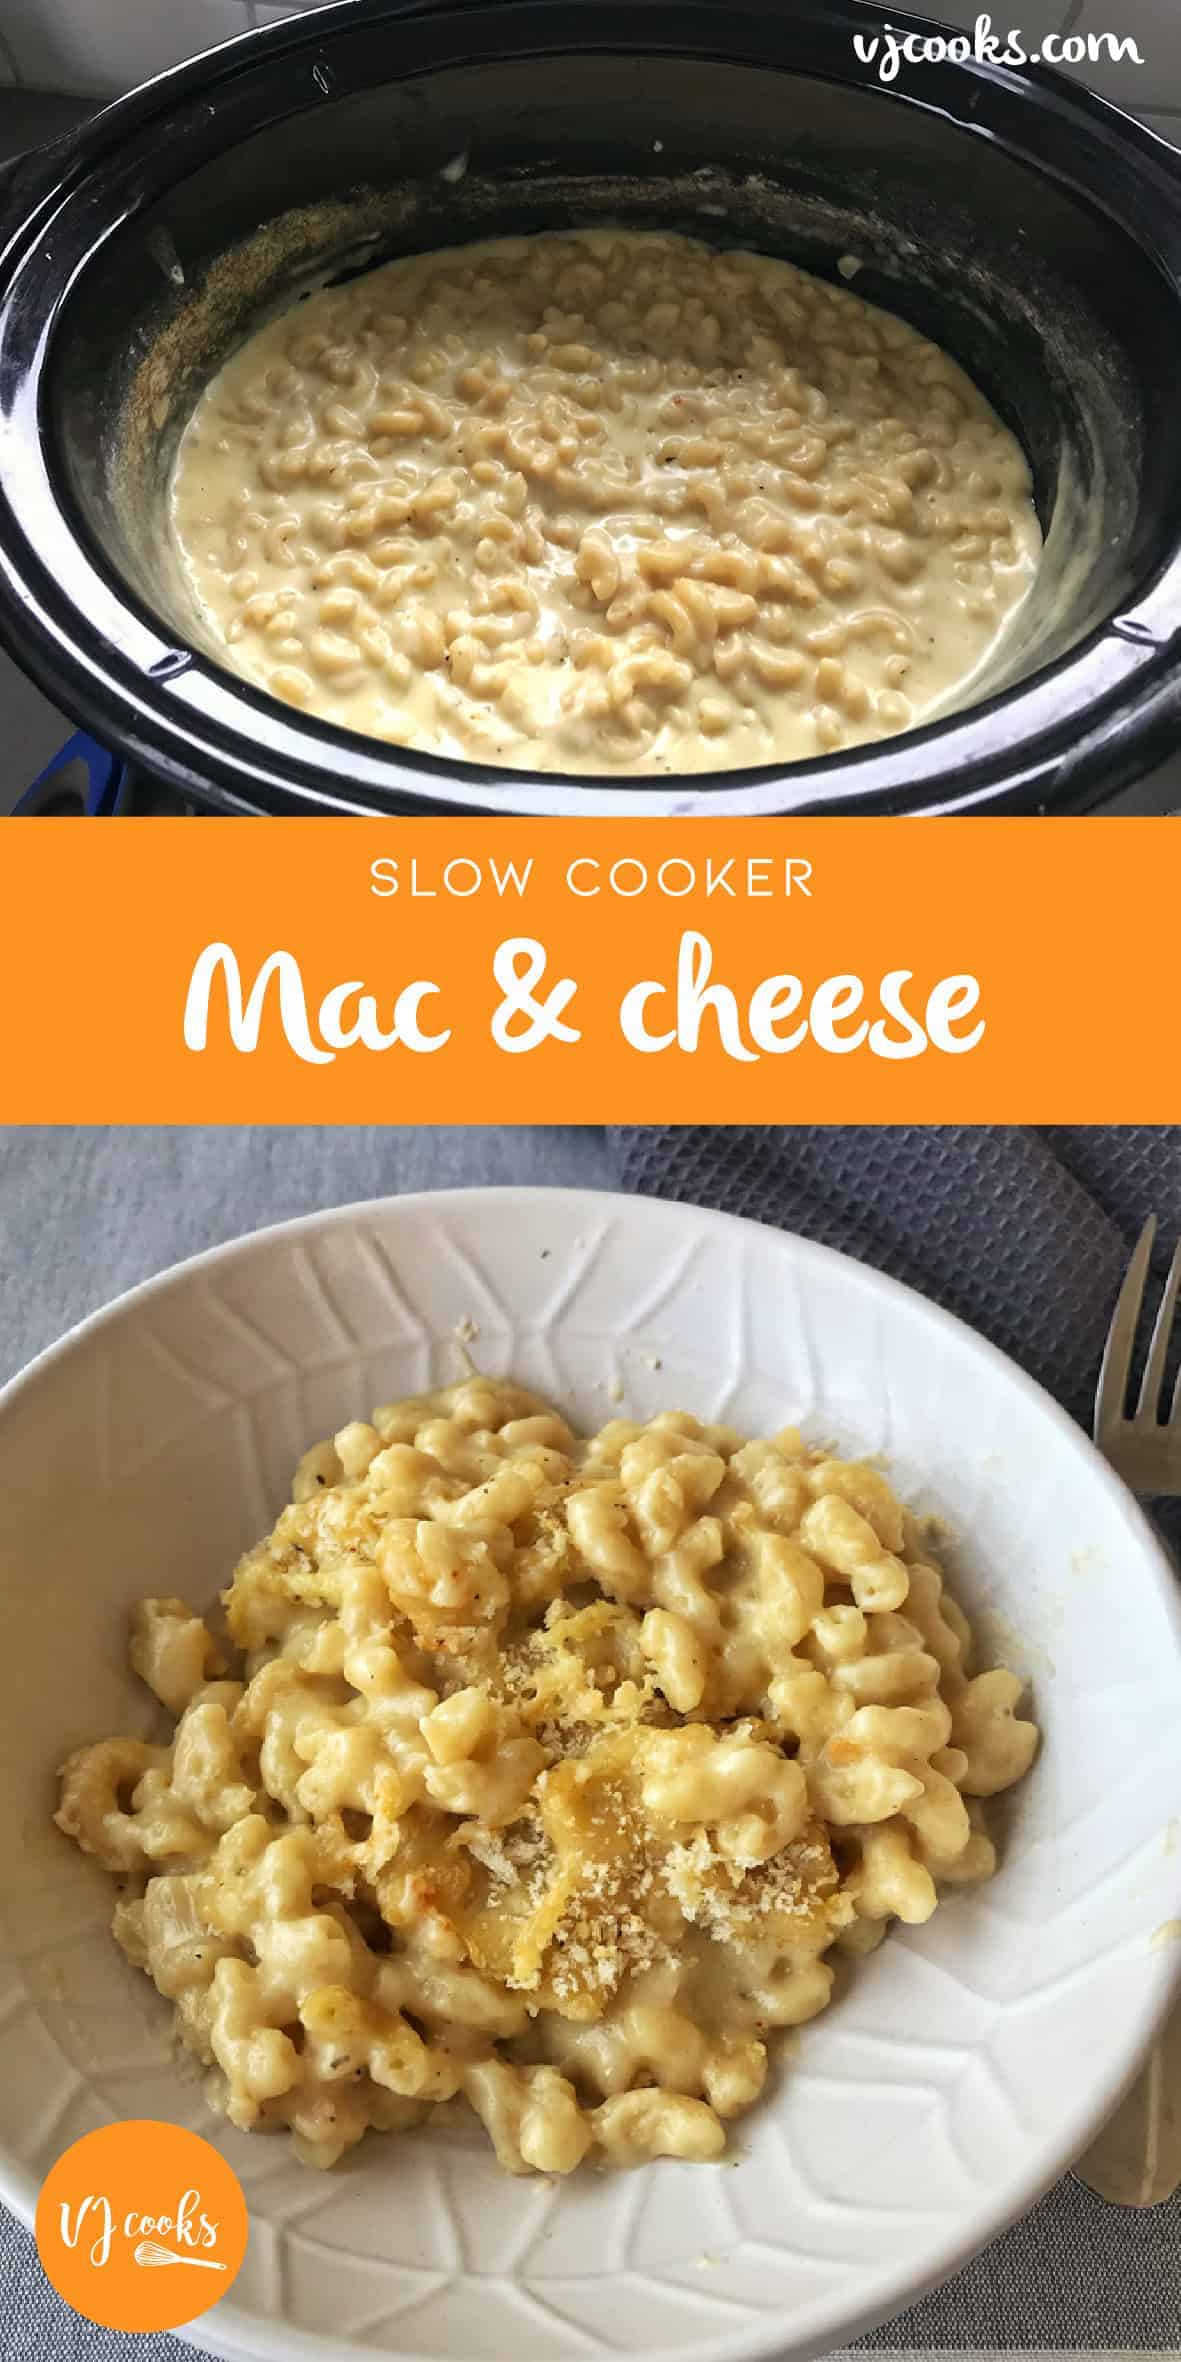 Easy slow cooker Mac and Cheese, recipe by VJ cooks. Macaroni and cheese in the crockpot. #macandcheese #slowcookermacandcheese #vjcooks 